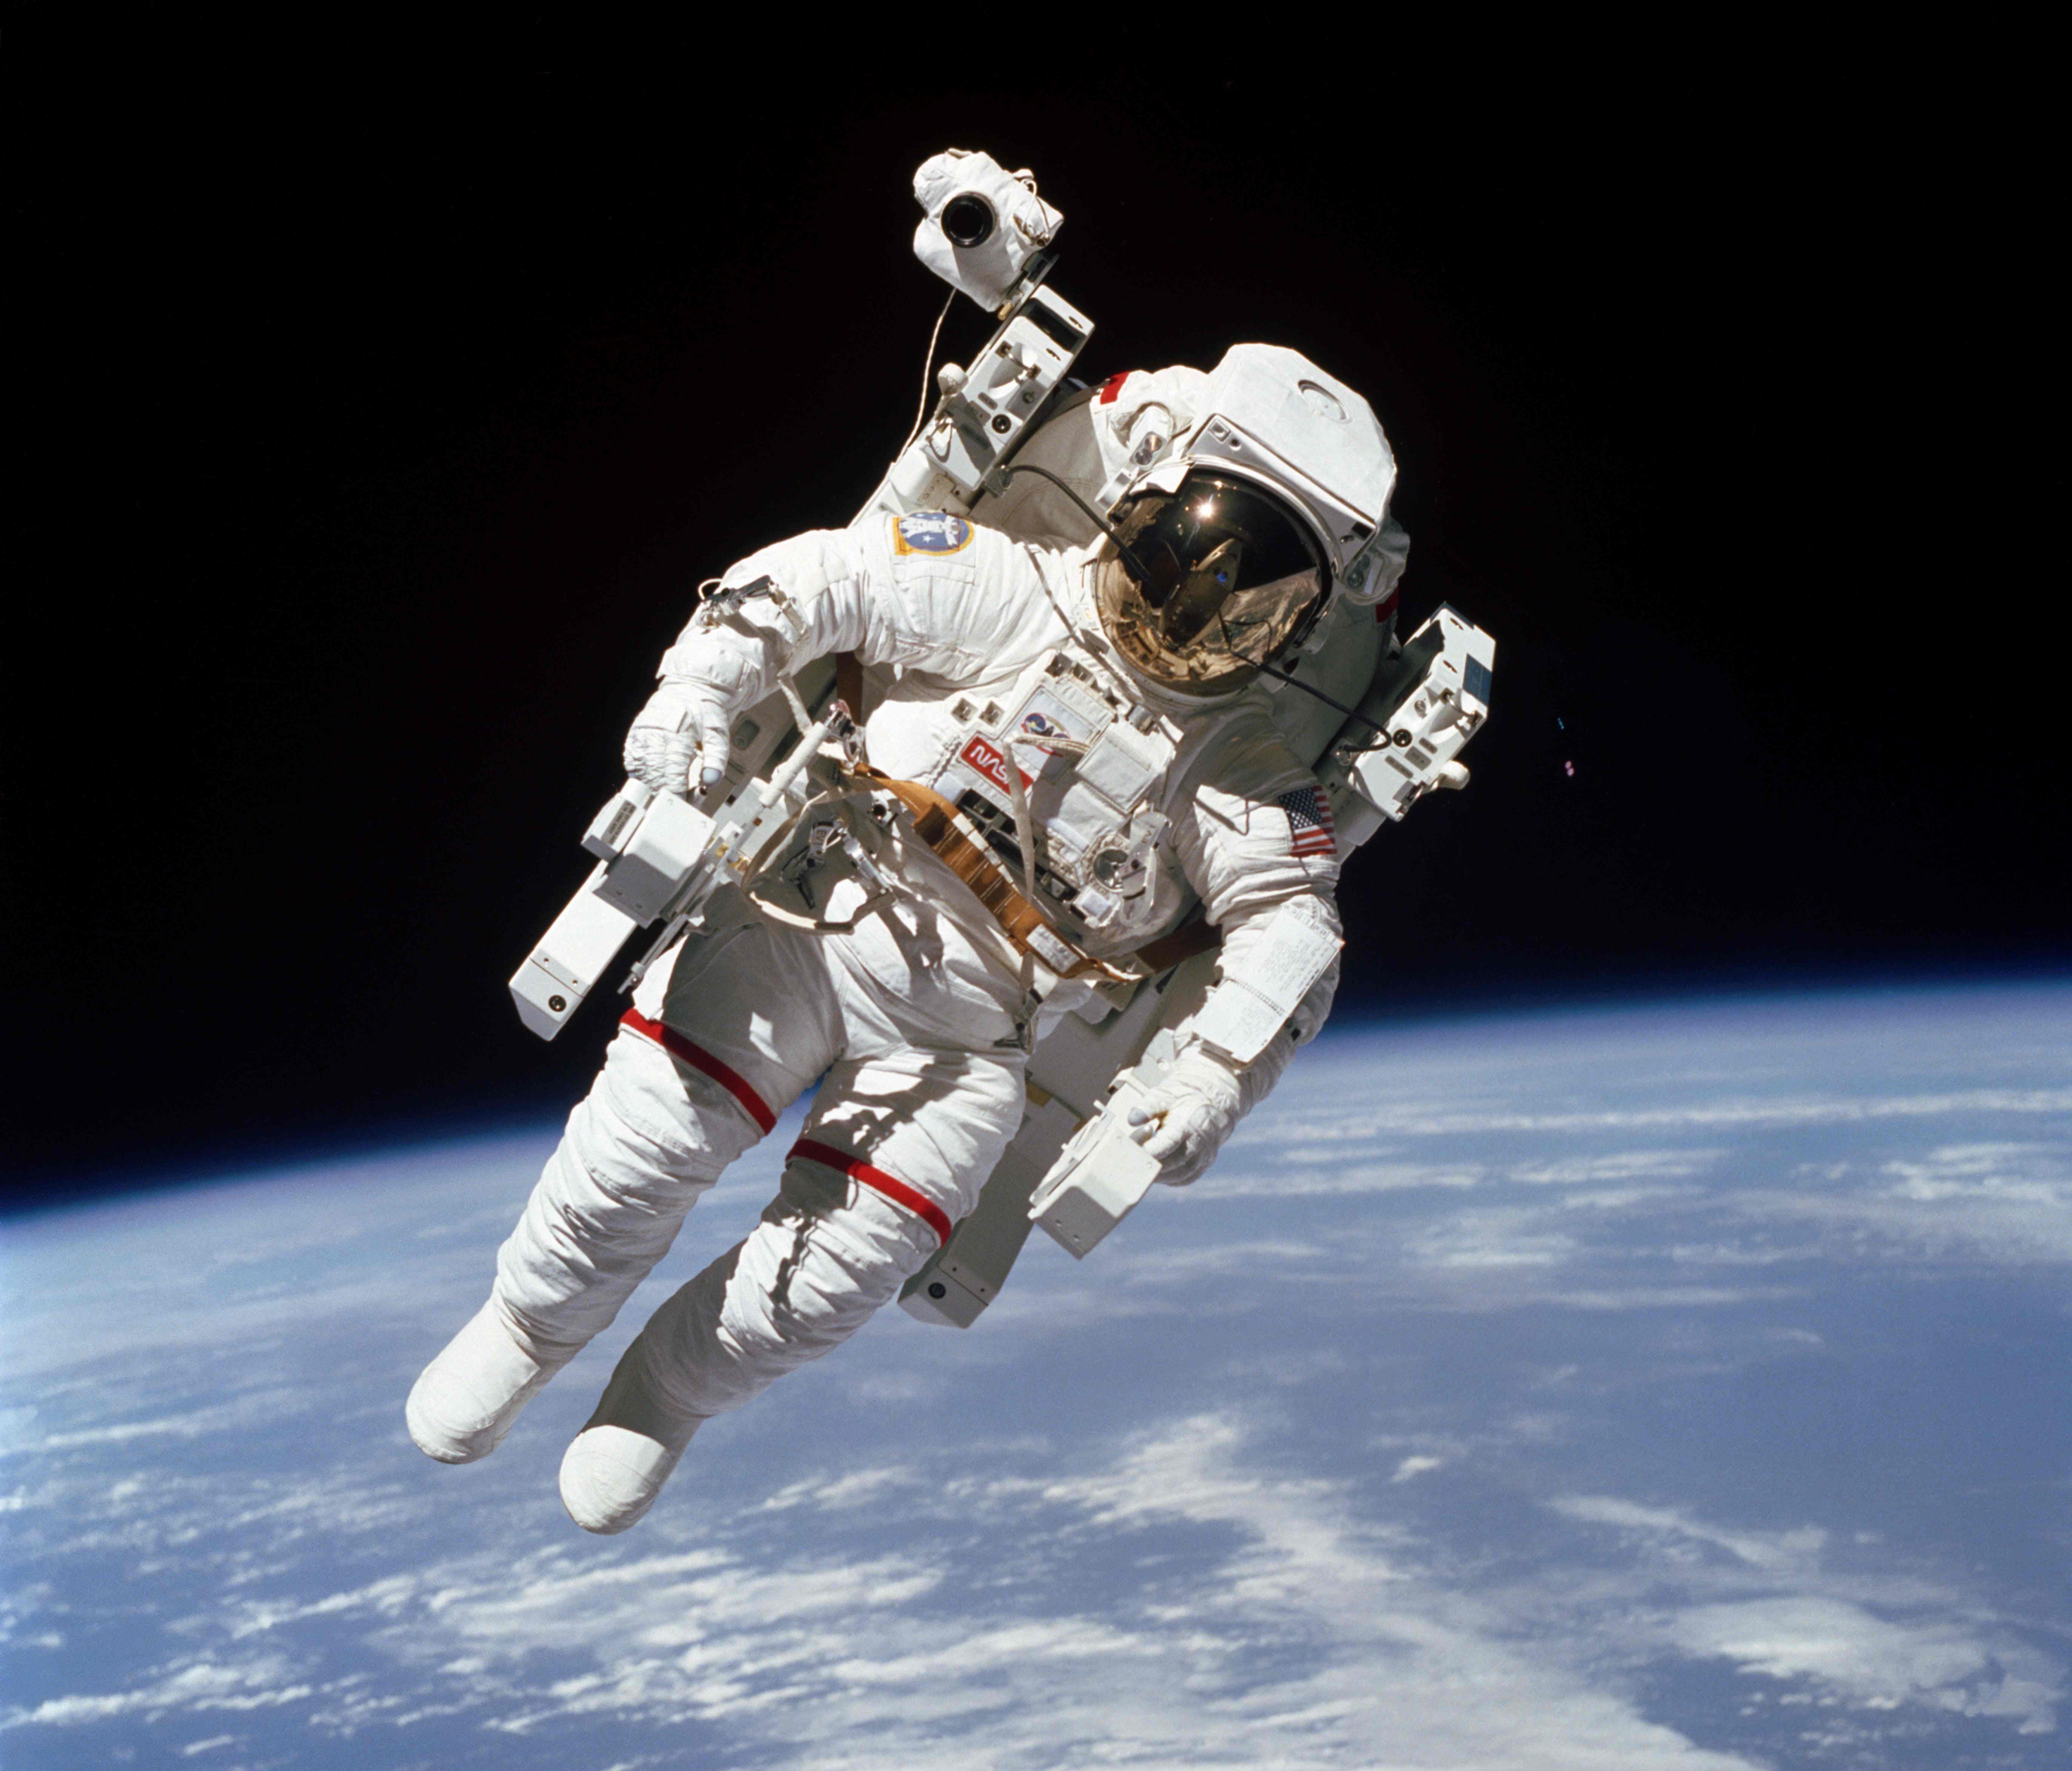 This photo taken on February 7, 1984, shows the first untethered spacewalk, NASA astronaut Bruce McCandless is in the midst of the first 